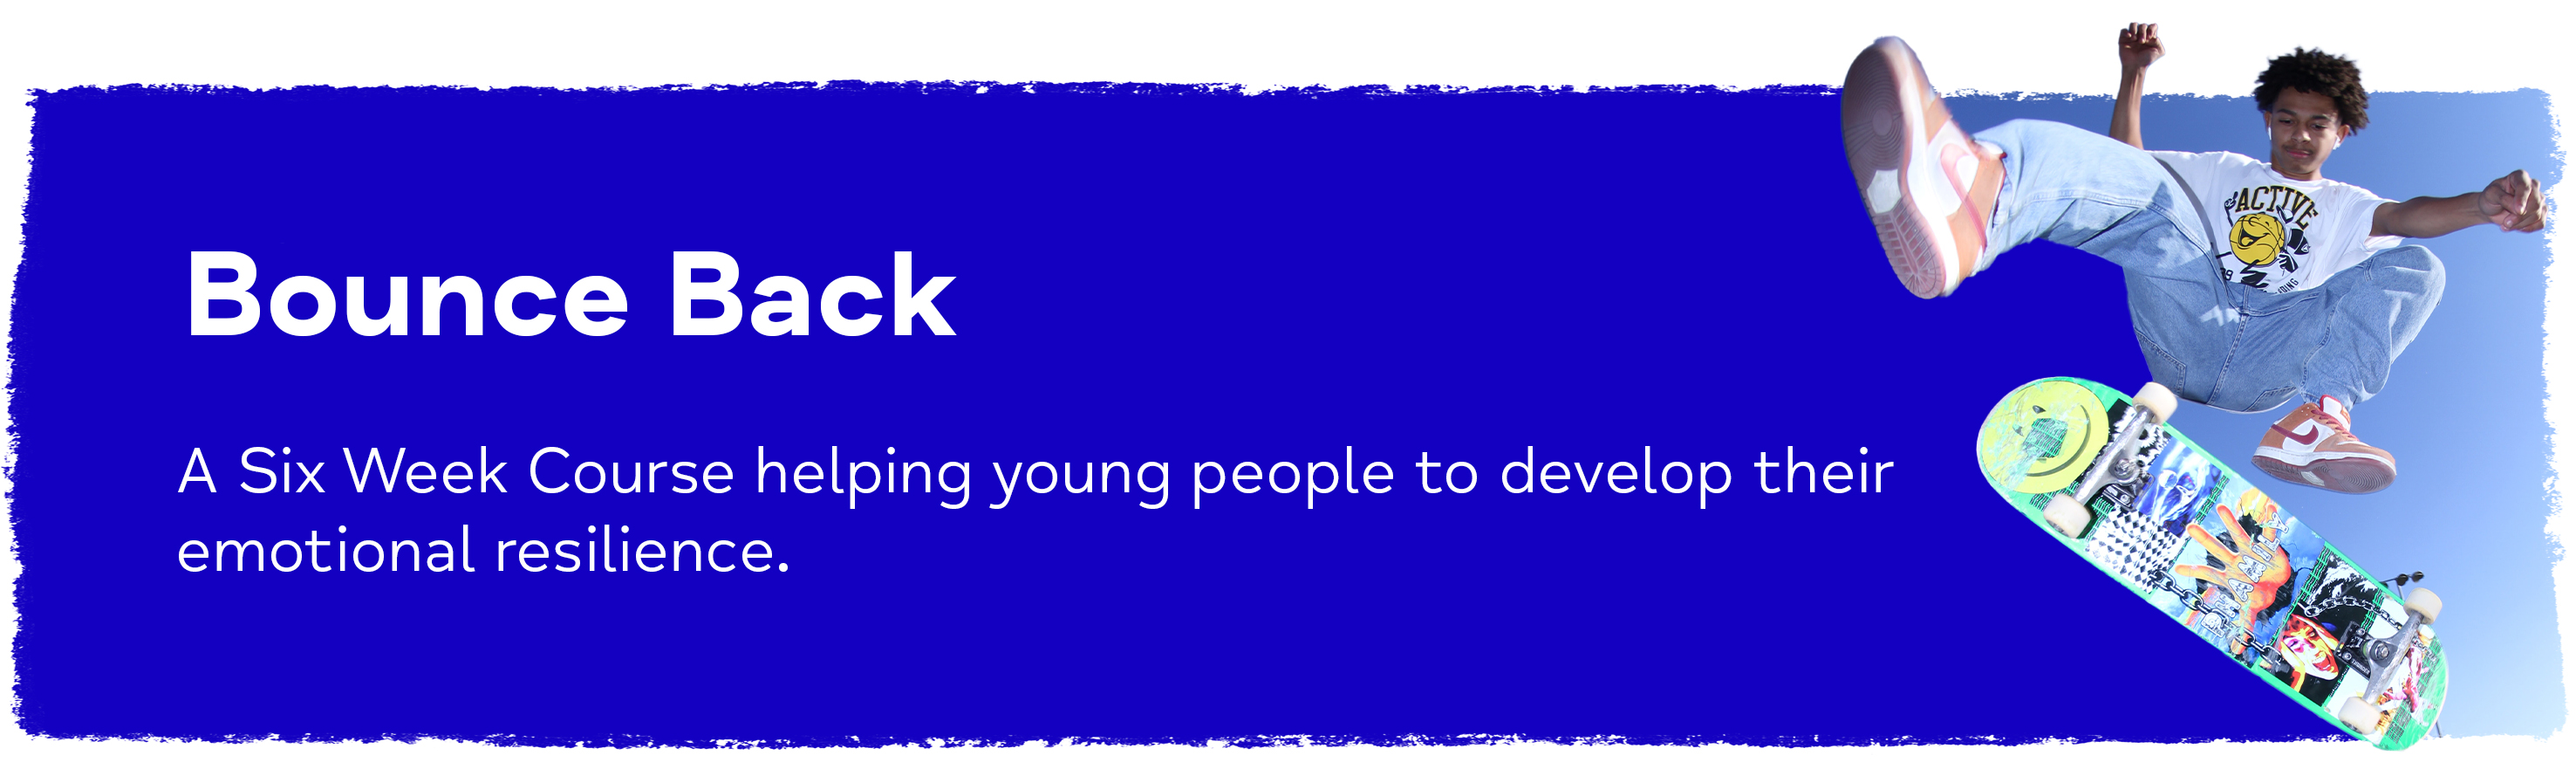 Bounce Back - A Six Week course helping young people to develop their emotional resilience.